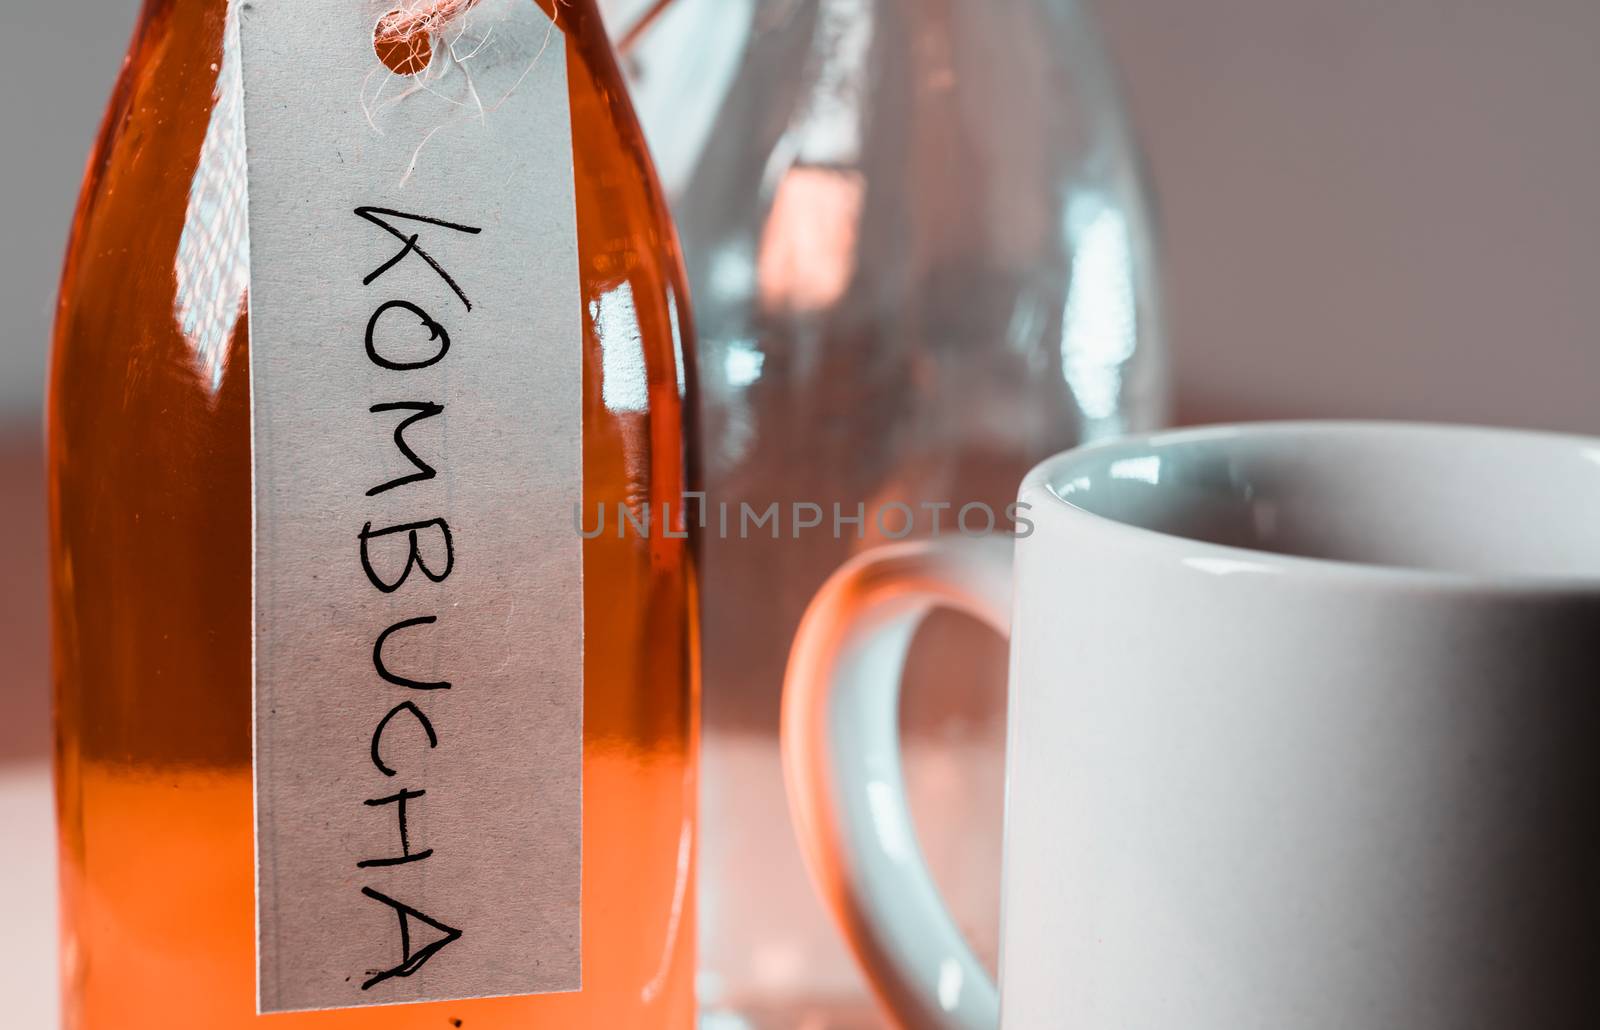 Kombucha lemonade is a fermented drink made from tea and lemon, produced using culture SCOBY